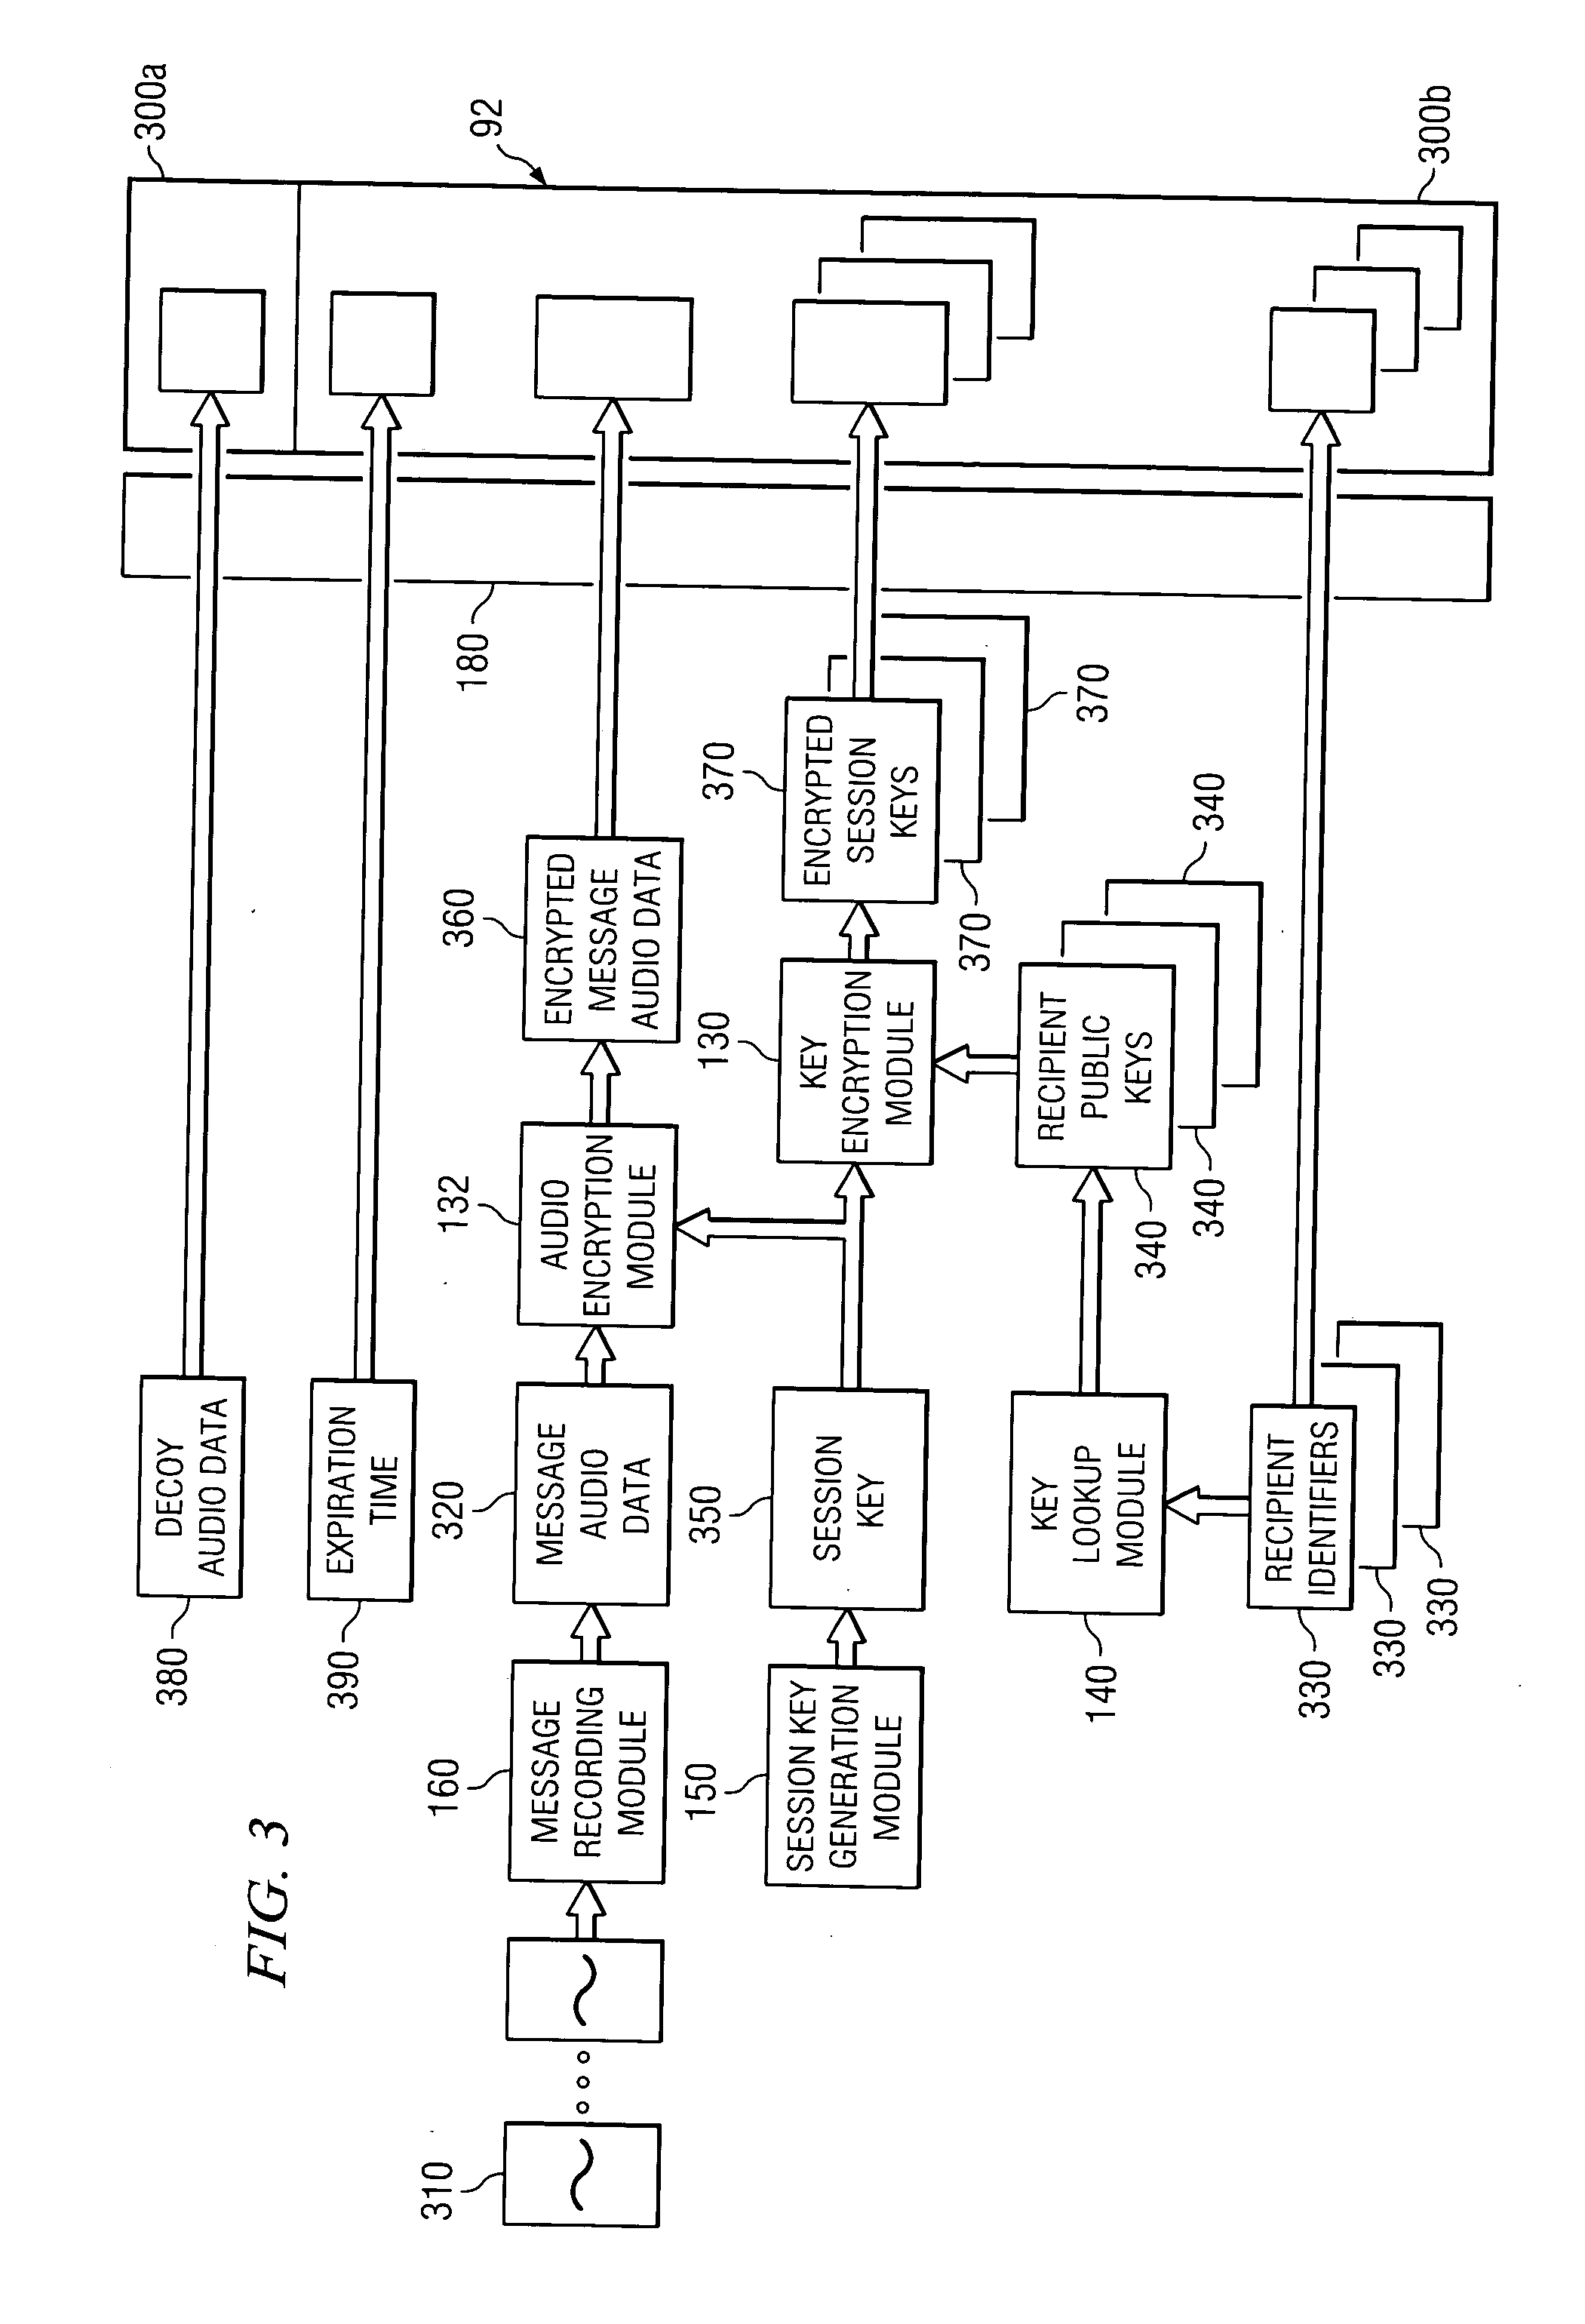 System and method for communicating confidential messages